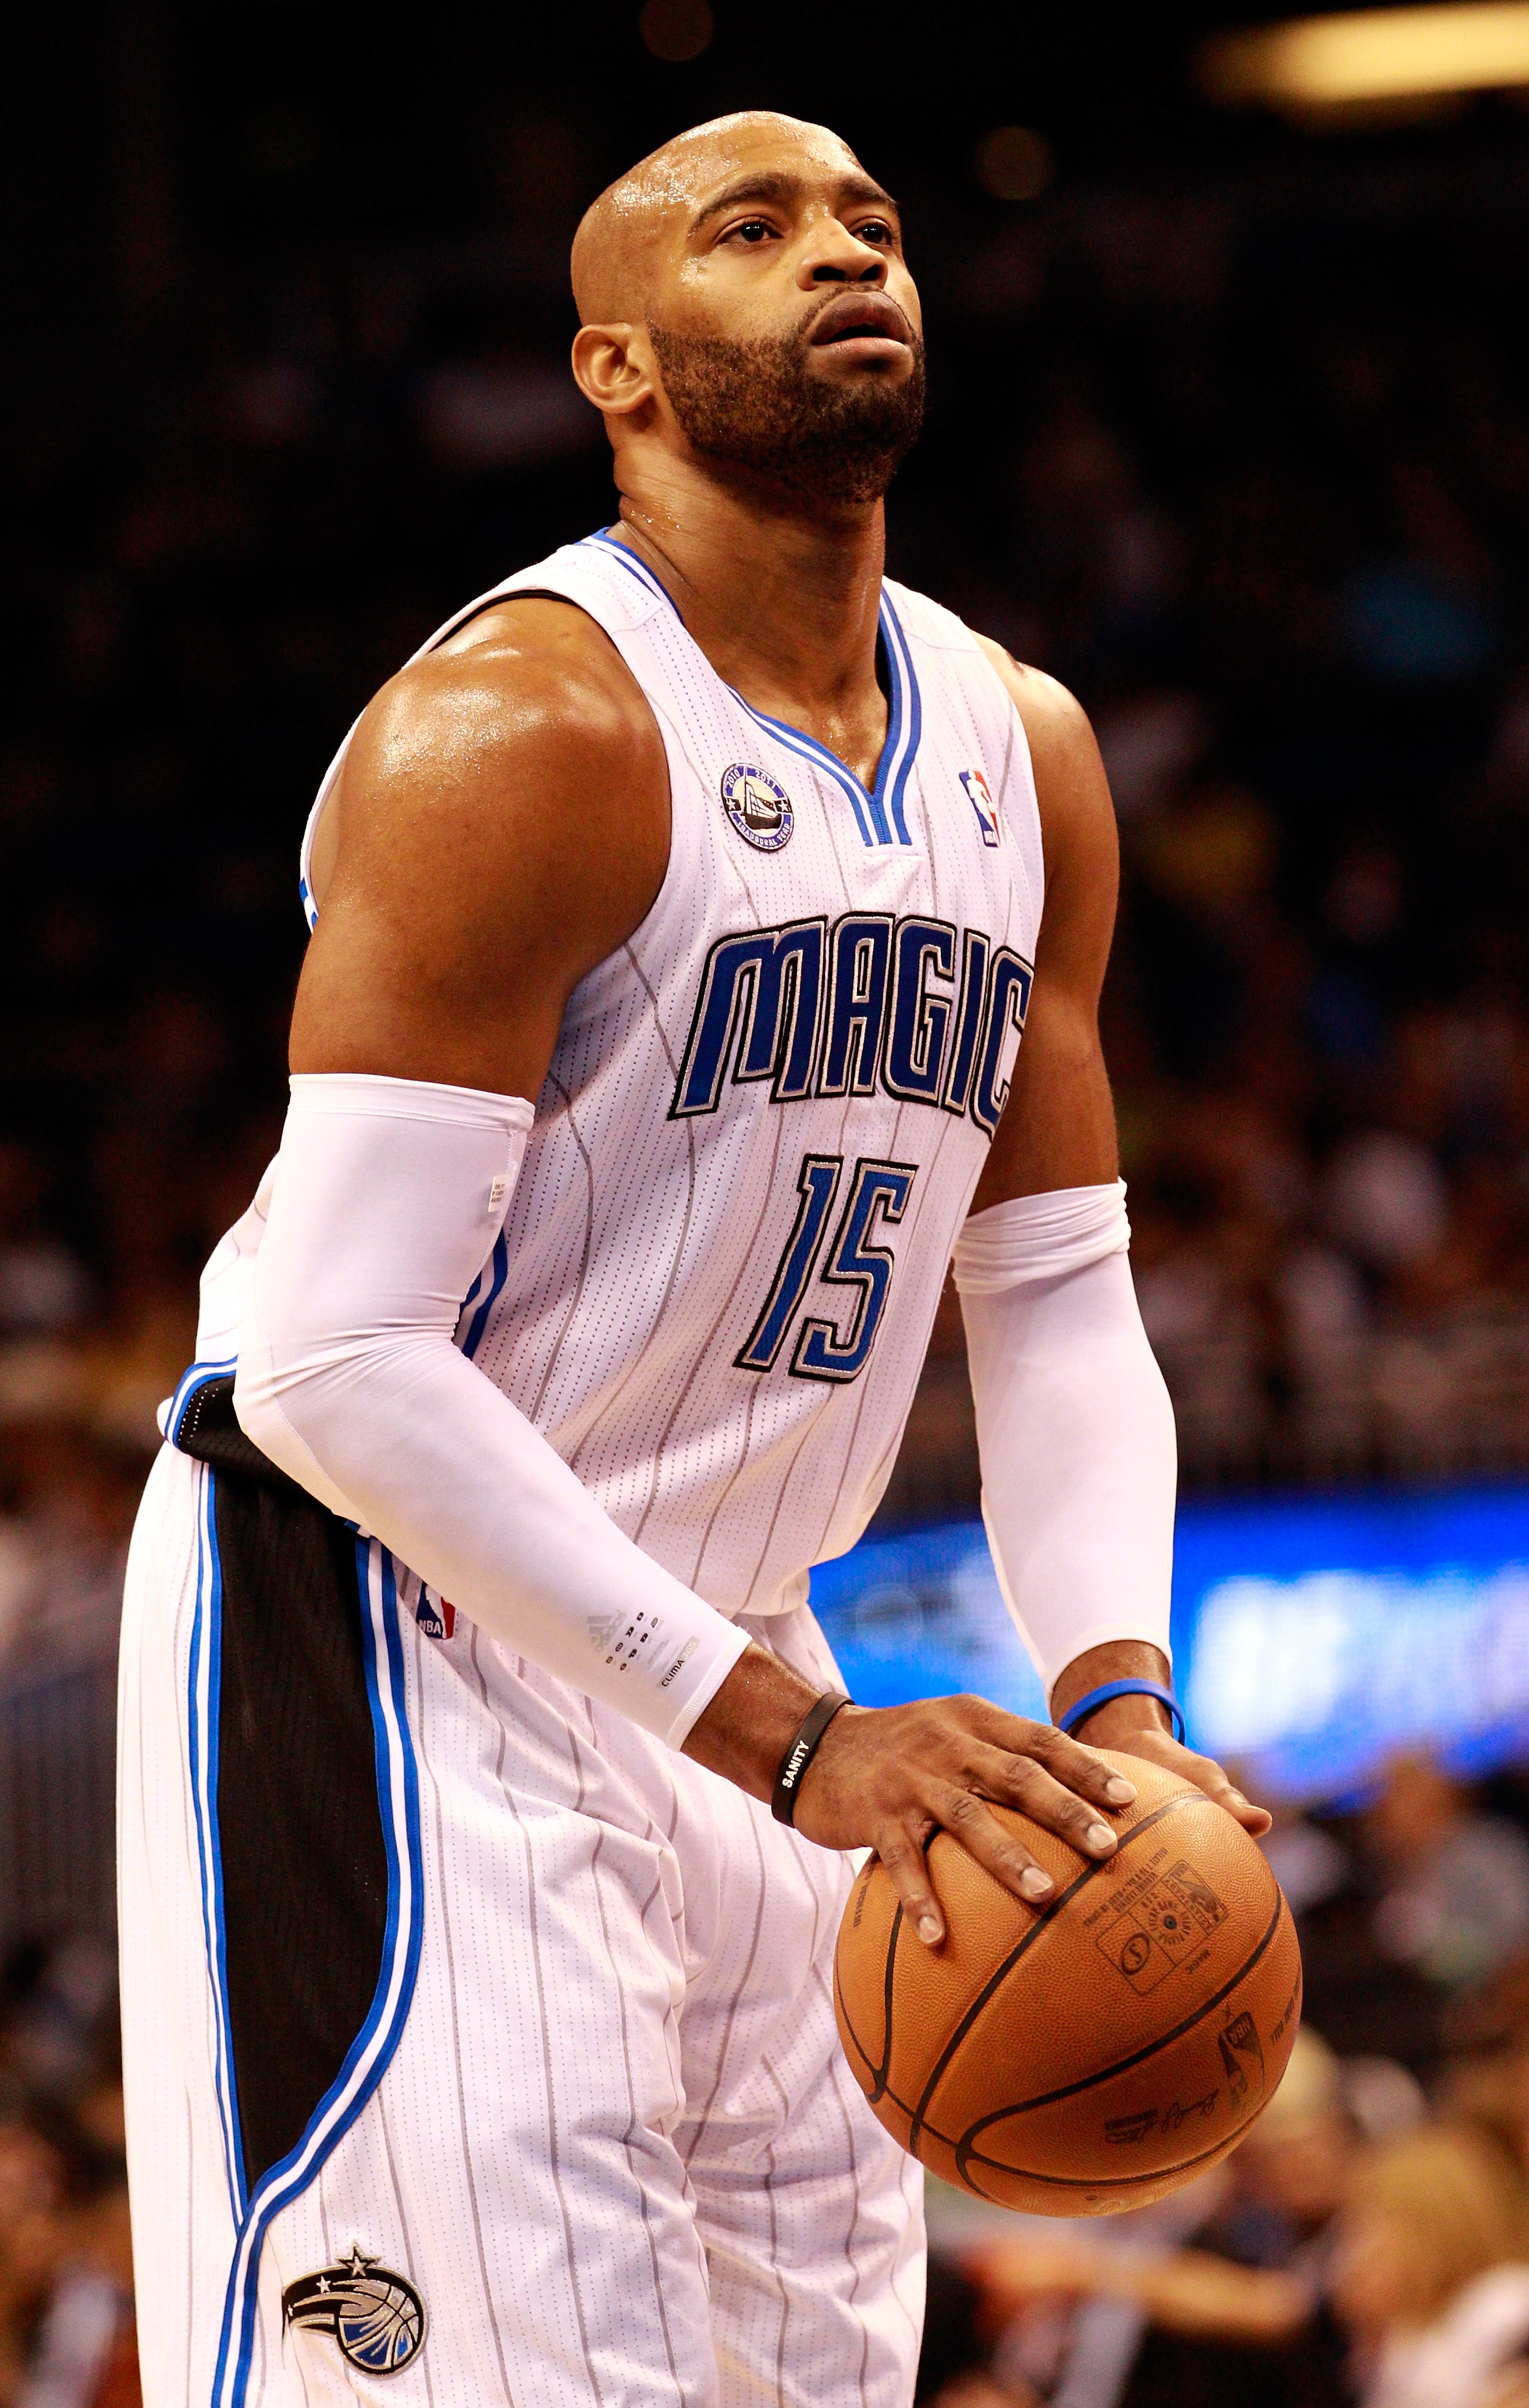 ORLANDO, FL - NOVEMBER 03:  Vince Carter #15 of the Orlando Magic attempts a foul shot during the game against the Minnesota Timberwolves at Amway Arena on November 3, 2010 in Orlando, Florida.  NOTE TO USER: User expressly acknowledges and agrees that, b